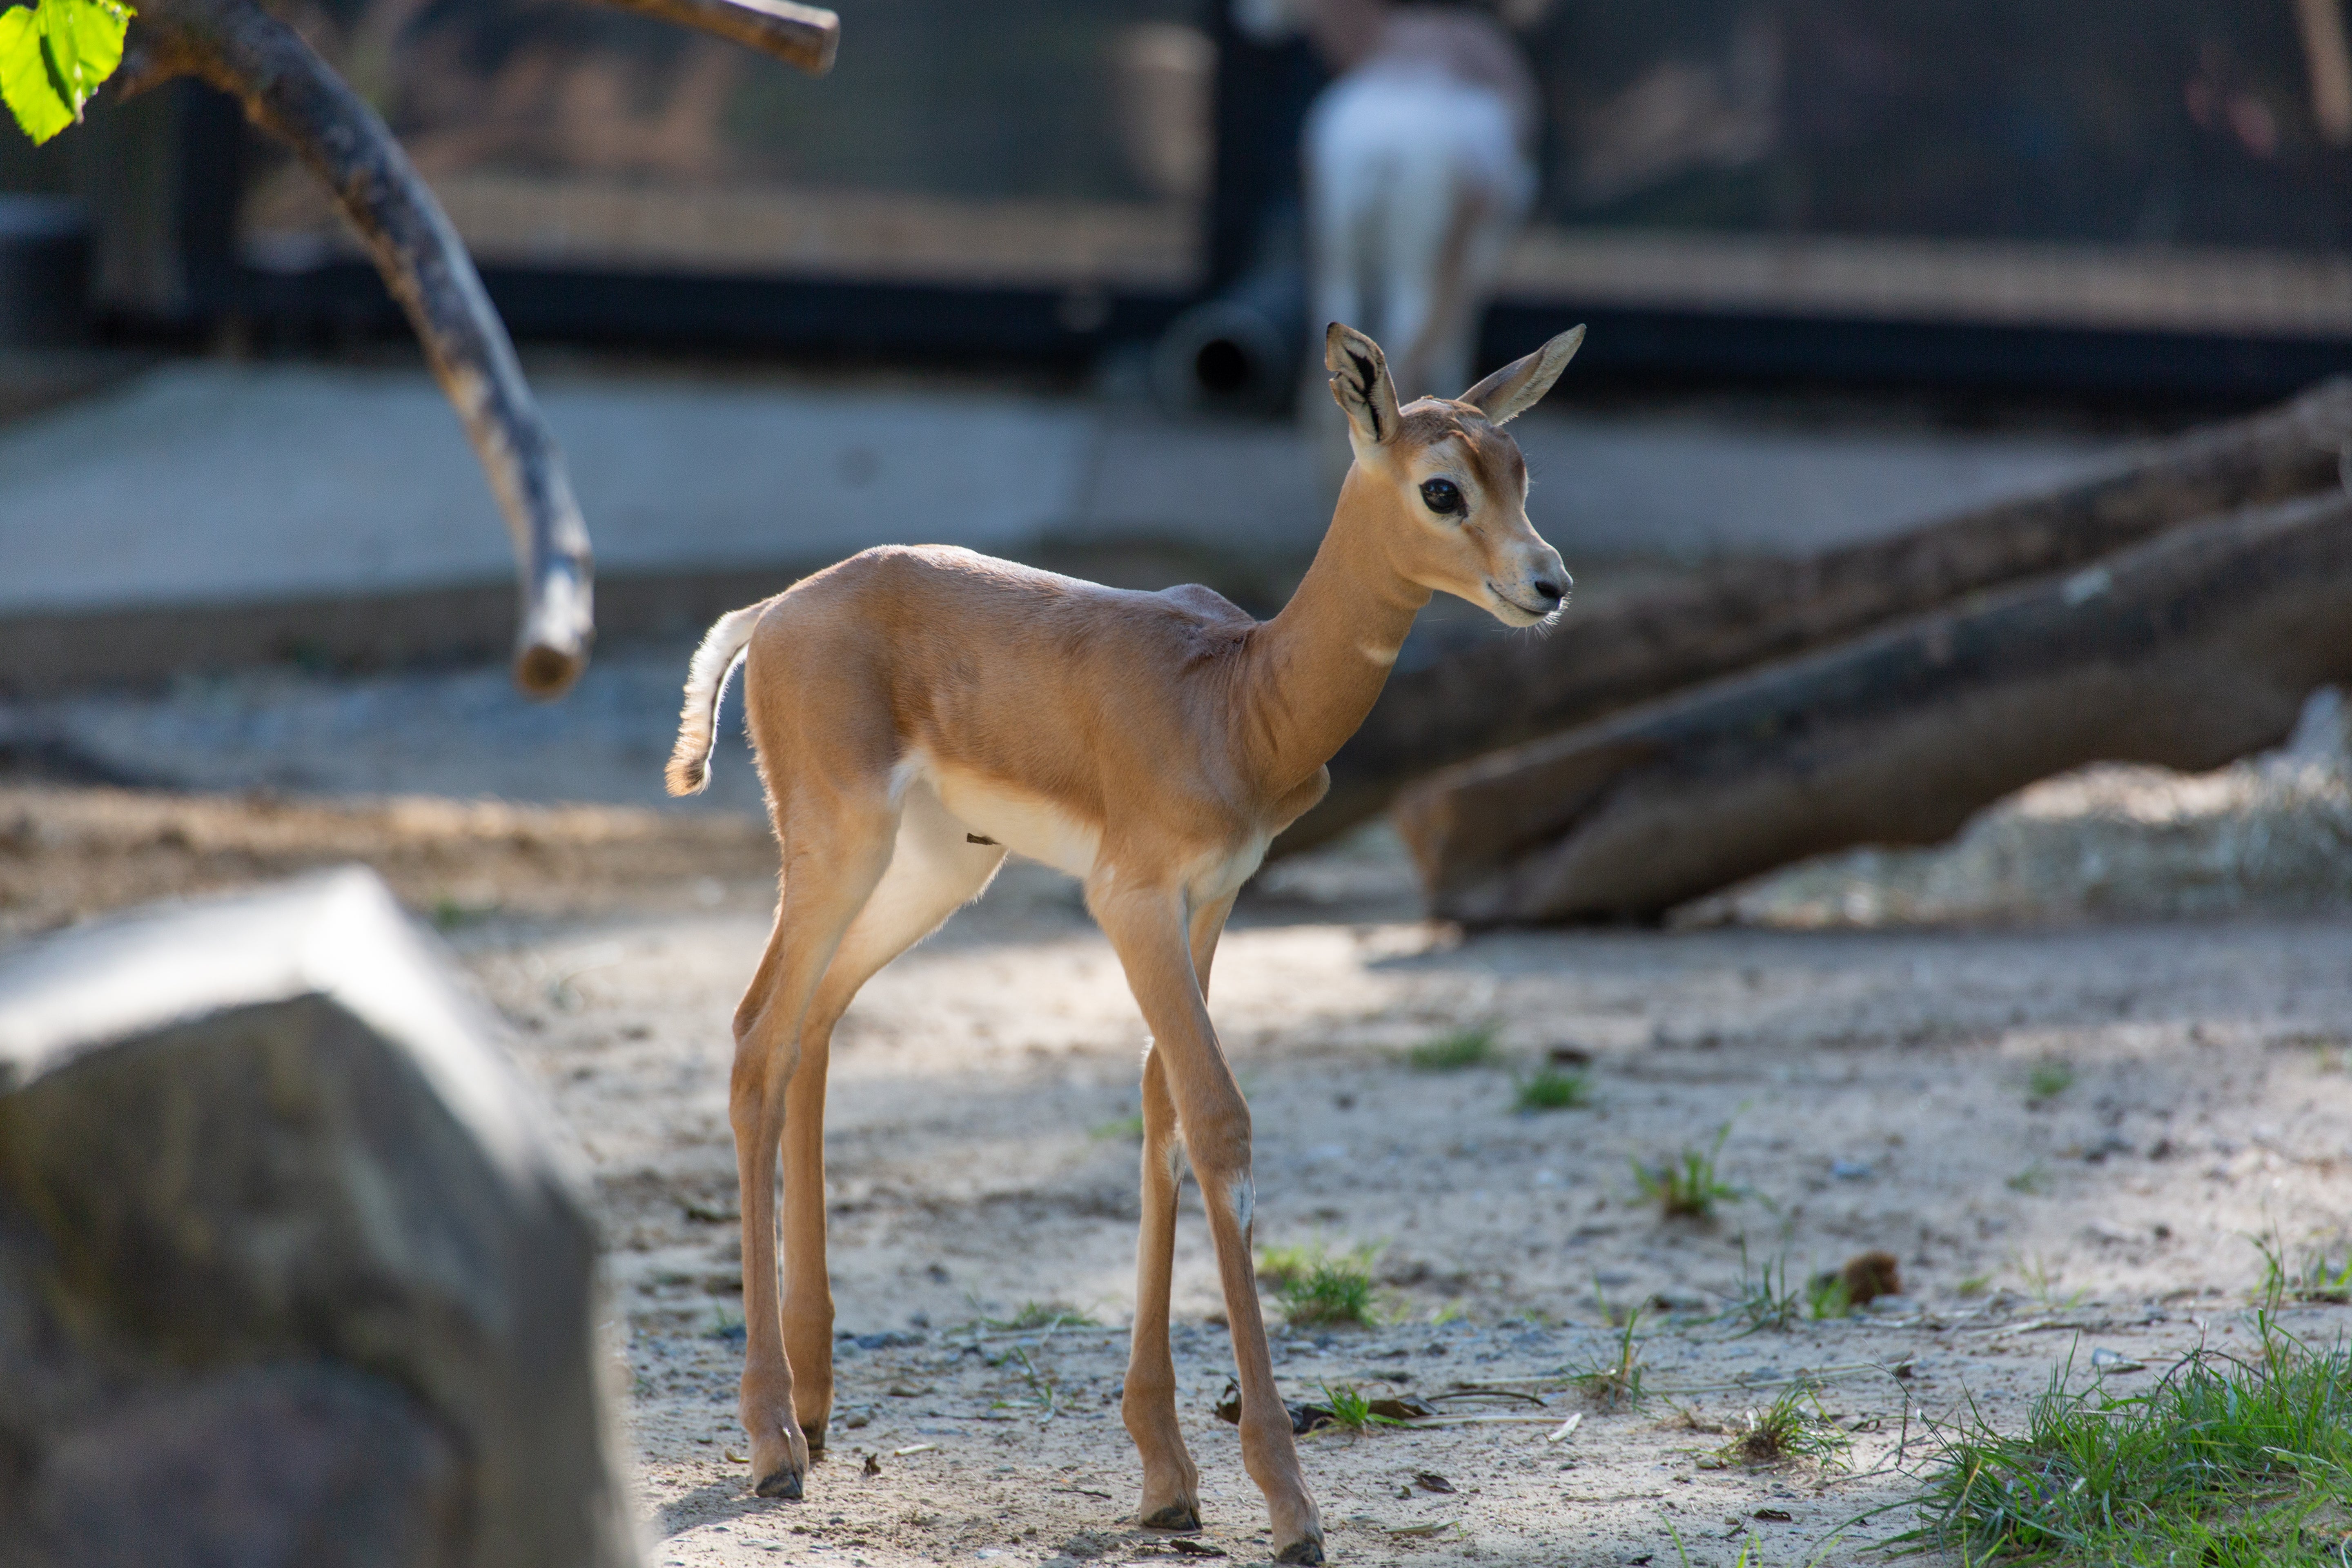 A young dama gazelle calf with brown fur, long legs, a slender body and a short tail stands in a sandy and grassy yard.